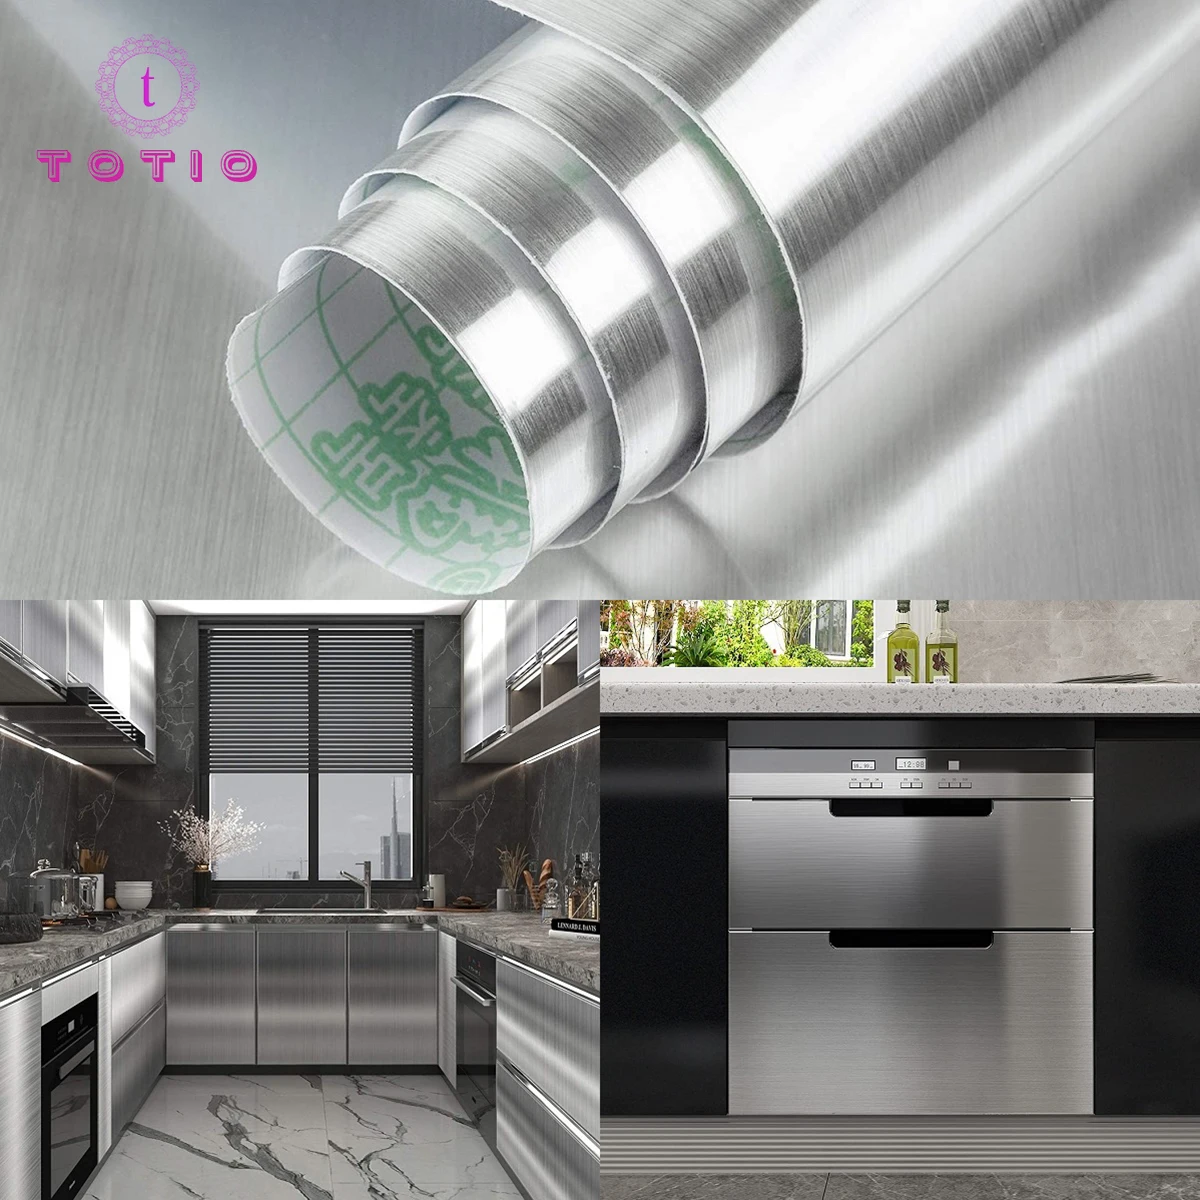 TOTIO Waterproof Silver Wallpaper Self Adhesive Stainless Steel Wallpaper Heat Resistance Vinyl Oilproof House Appliance Kitchen self adhesive stair mats 15 pcs 56x20 cm silver